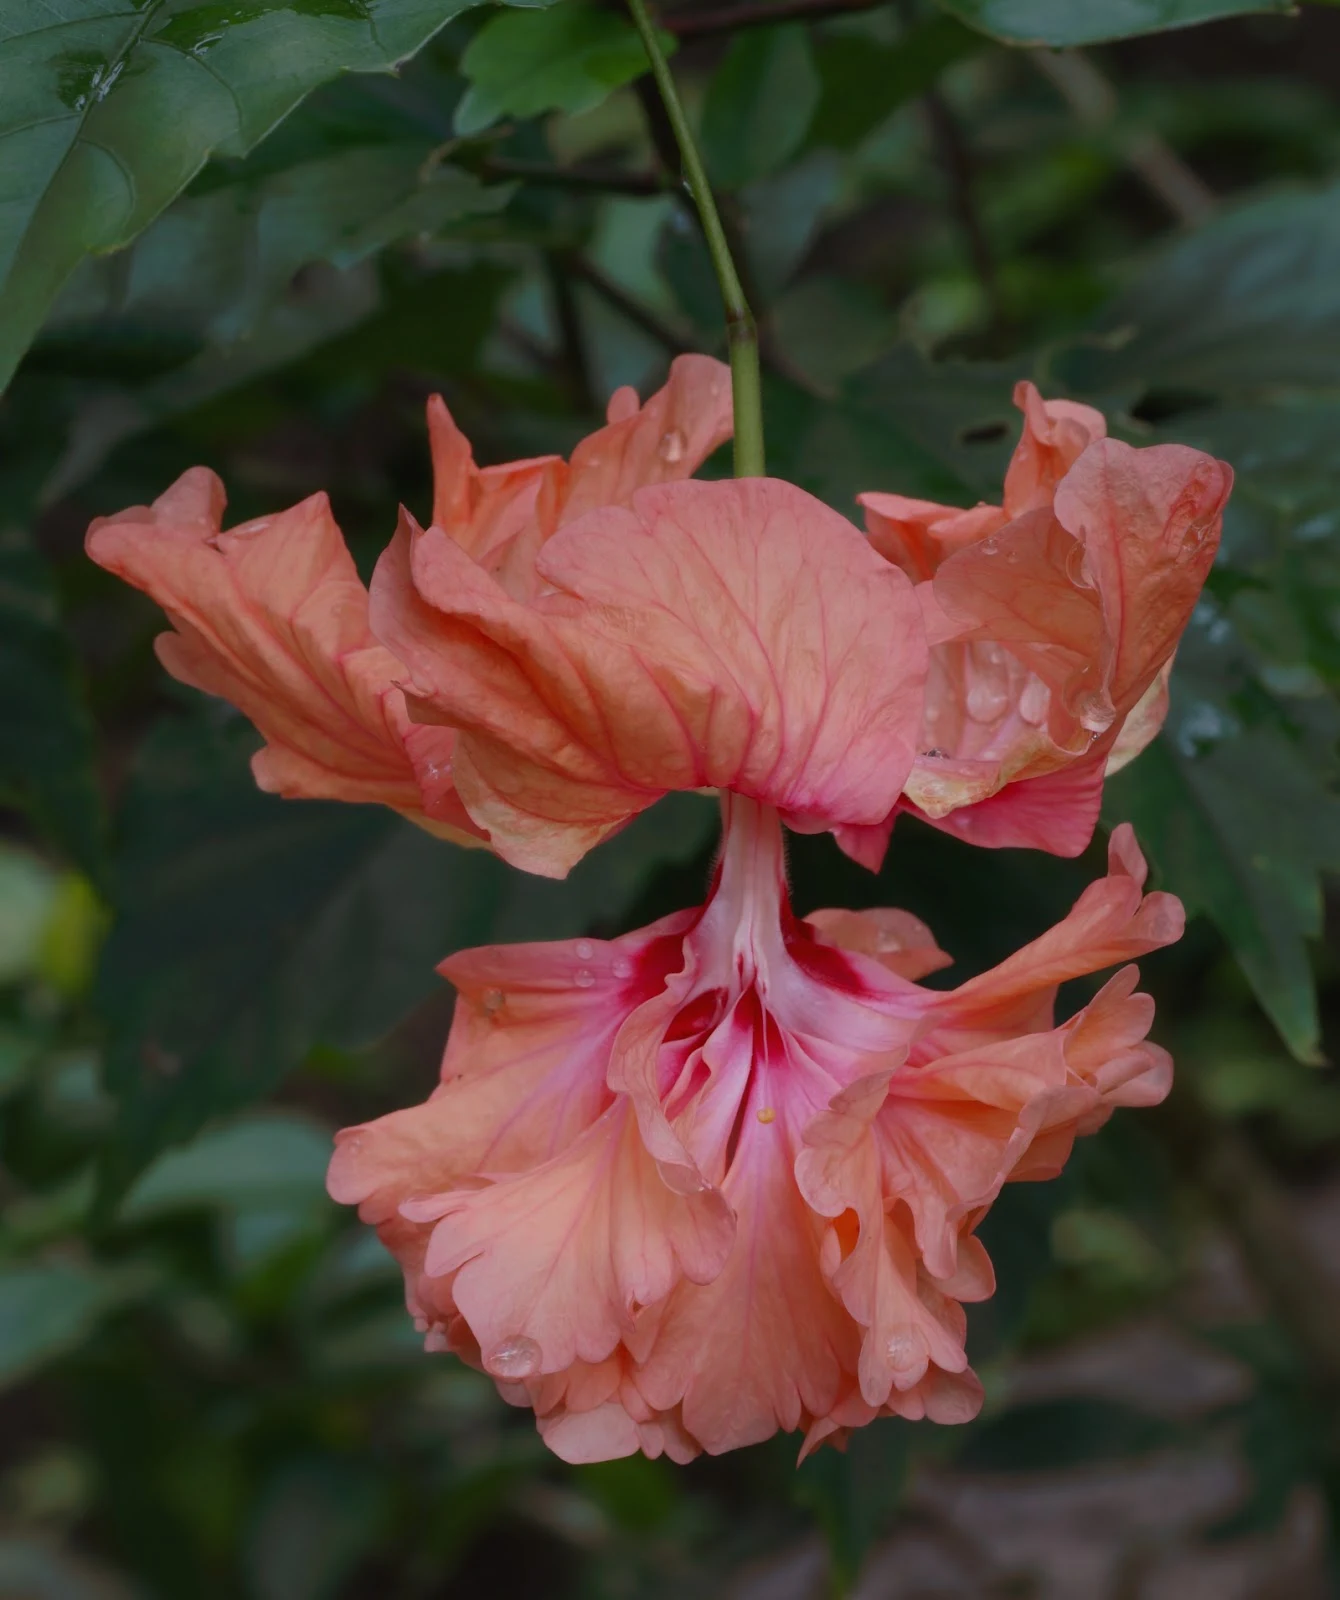 My harddrive is still being repaired and as pretty as this hibiscus is I miss my Capture One. Hopefully by this time next week I'll have it back.  